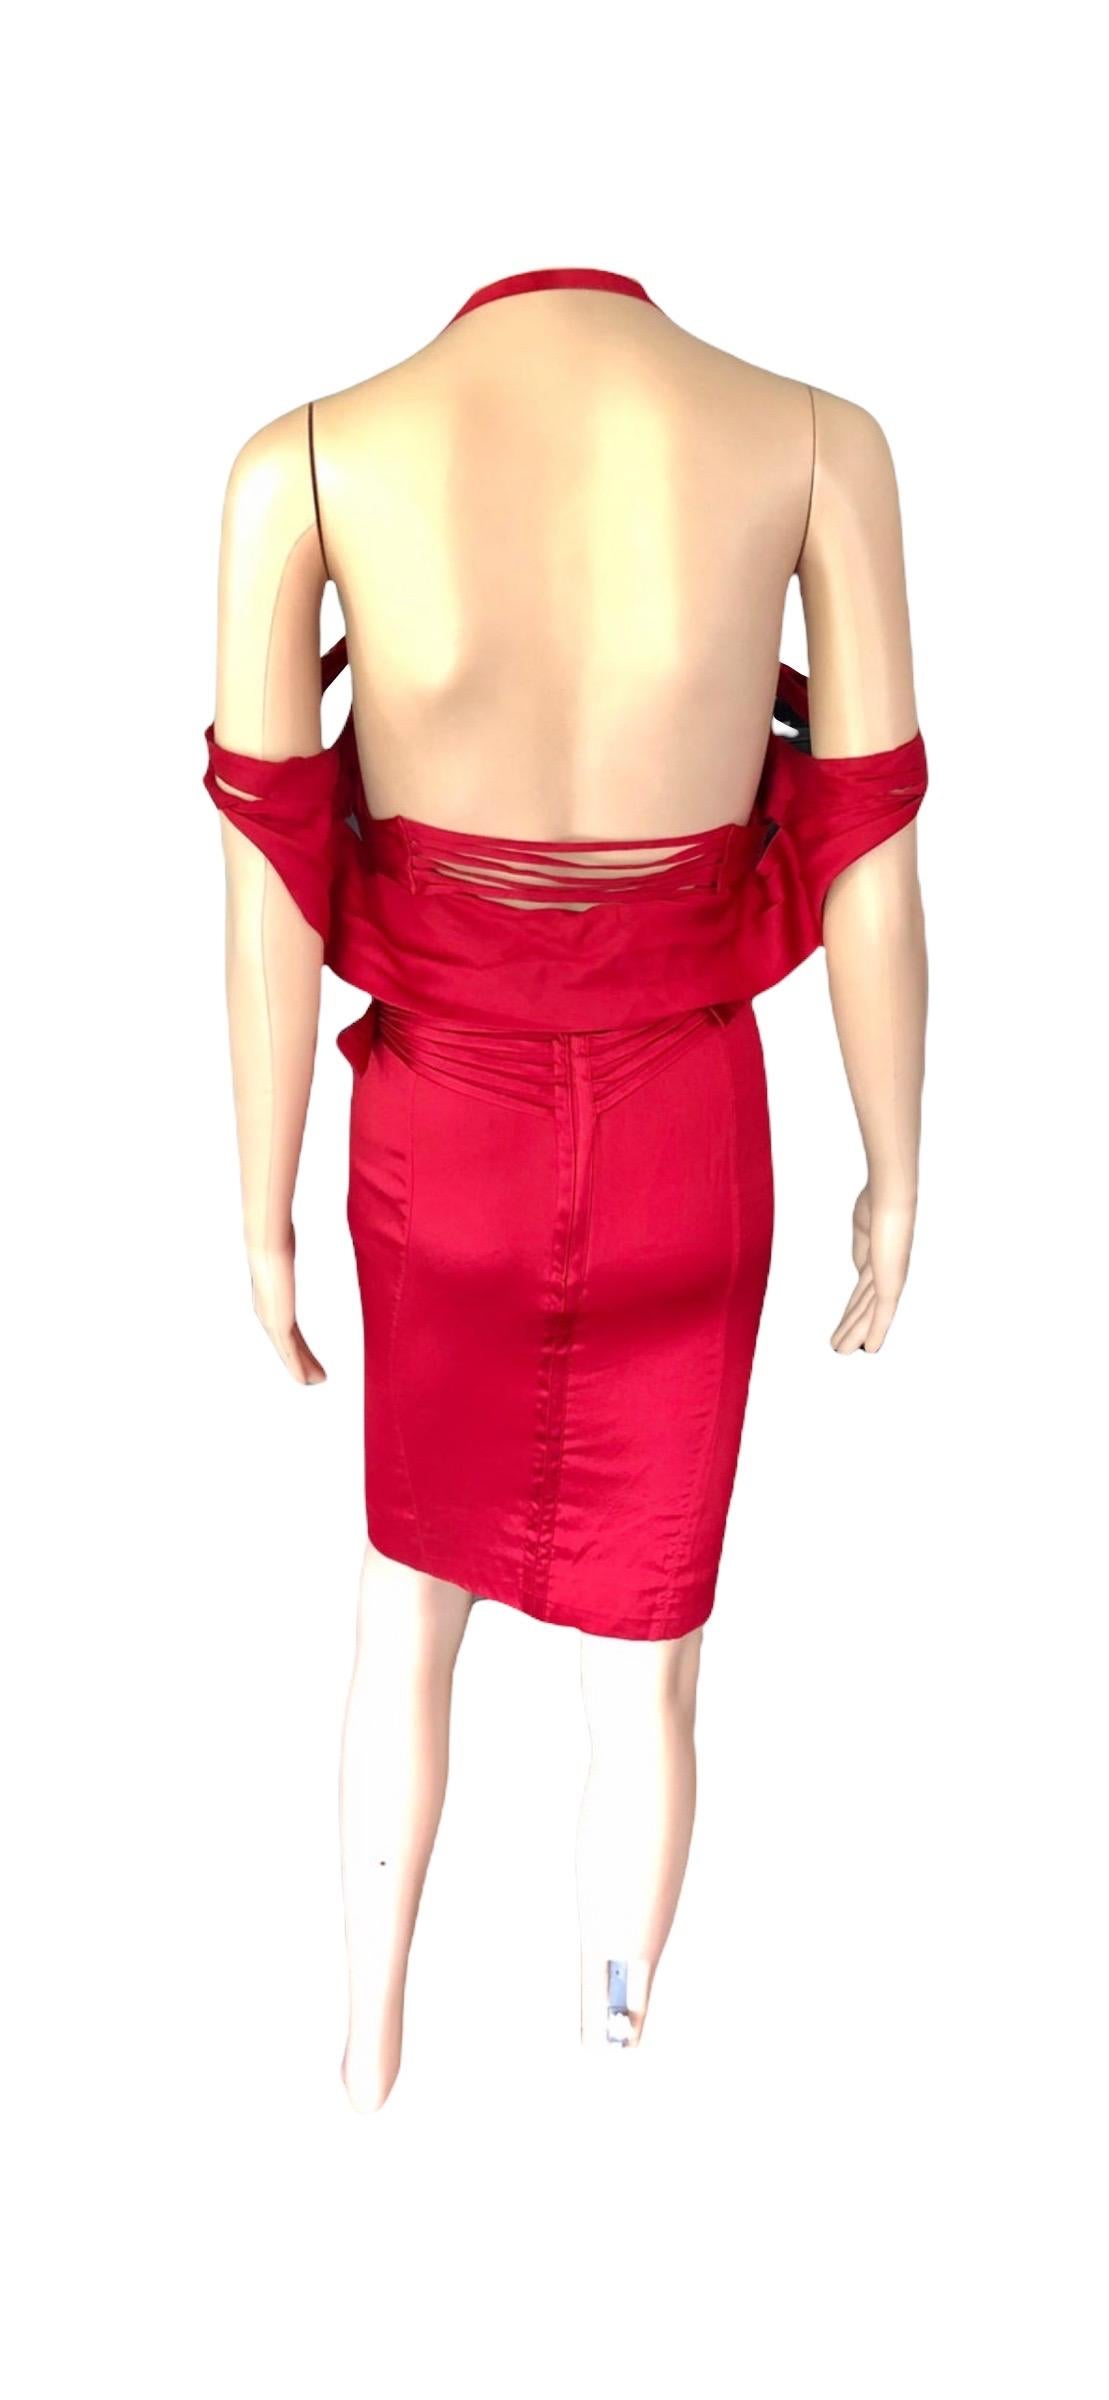 Tom Ford for Gucci F/W 2003 Runway Bustier Corset Silk Red Dress 12